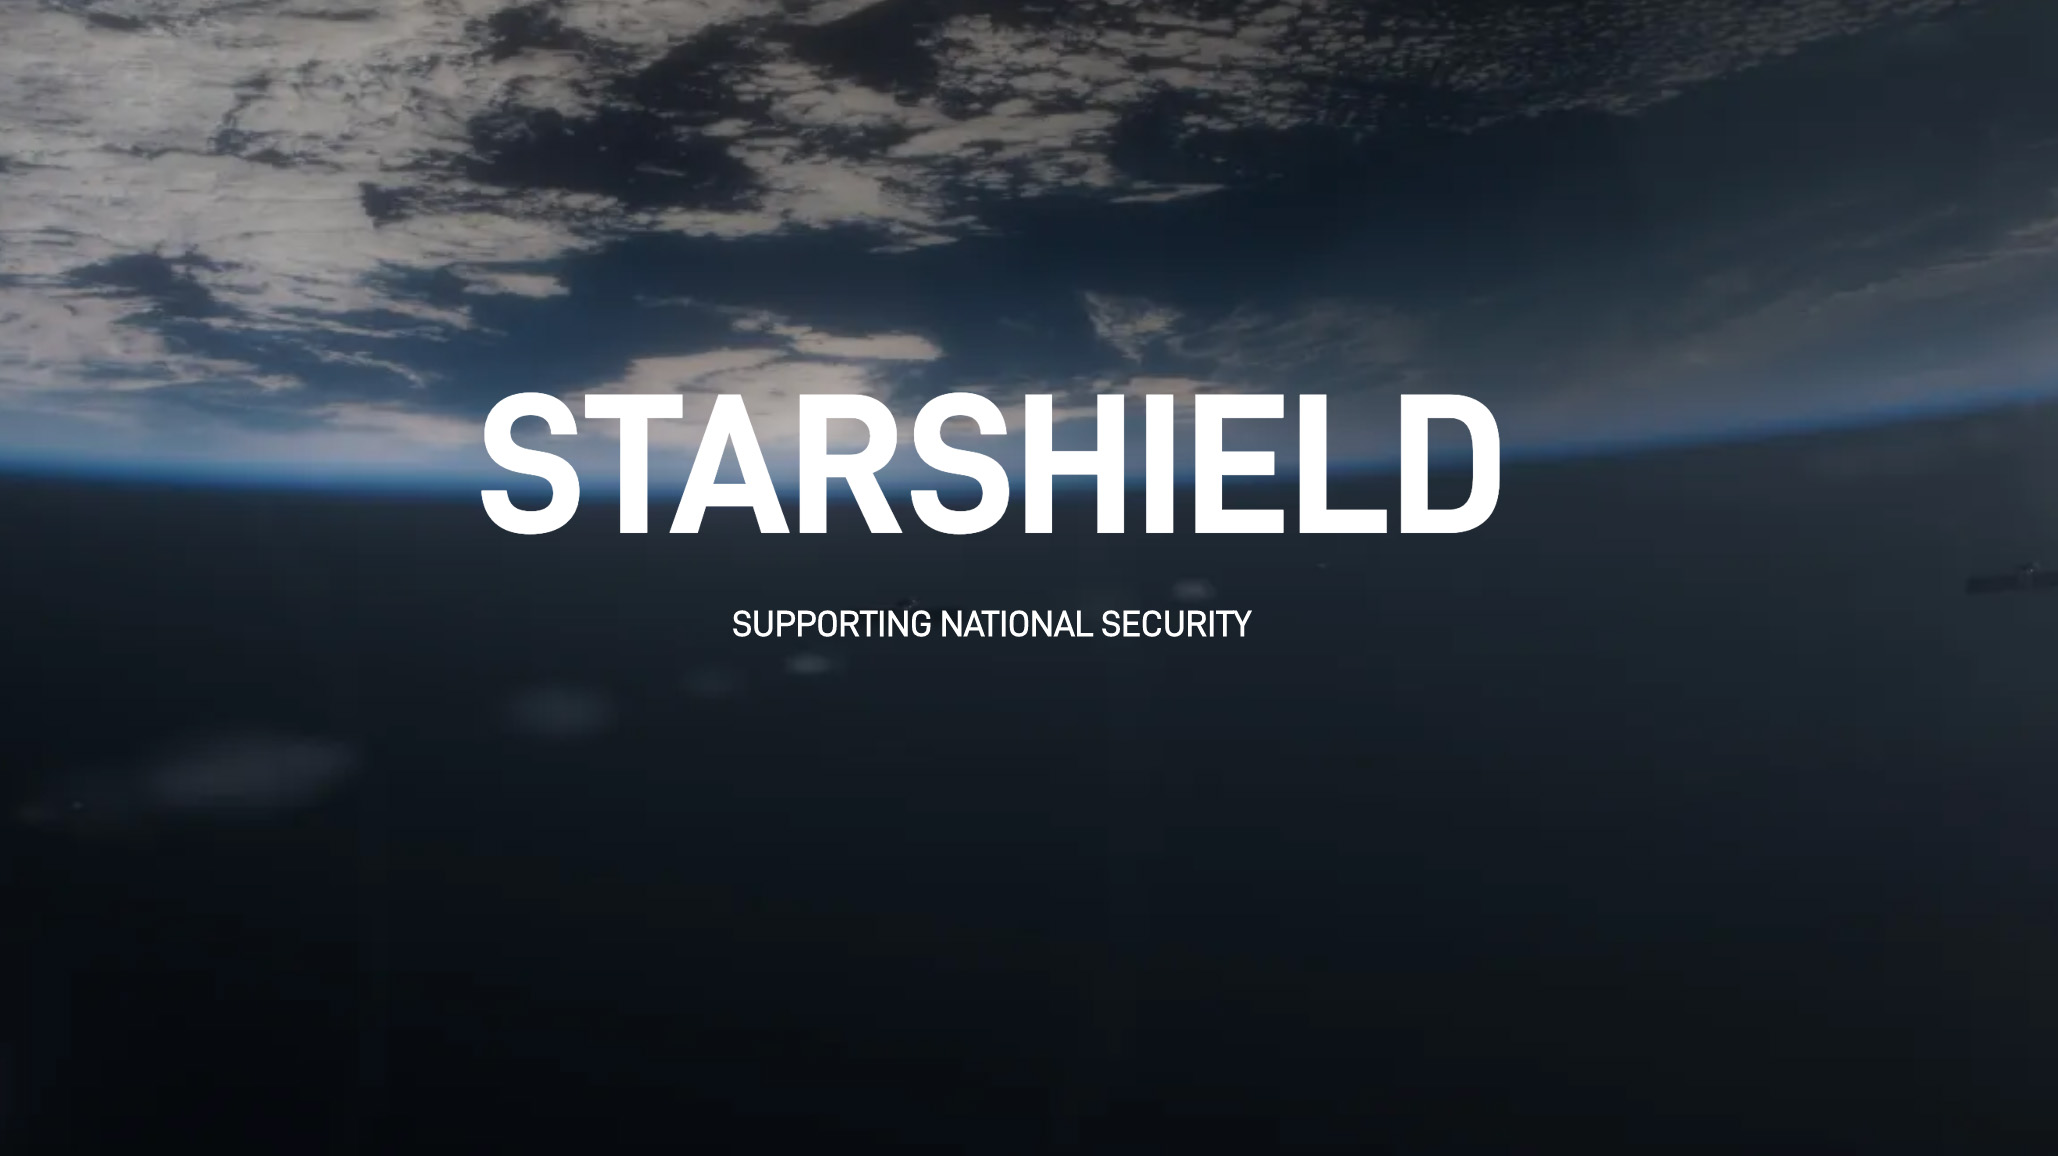 New Starlink service Starshield turns SpaceX into defence contractor